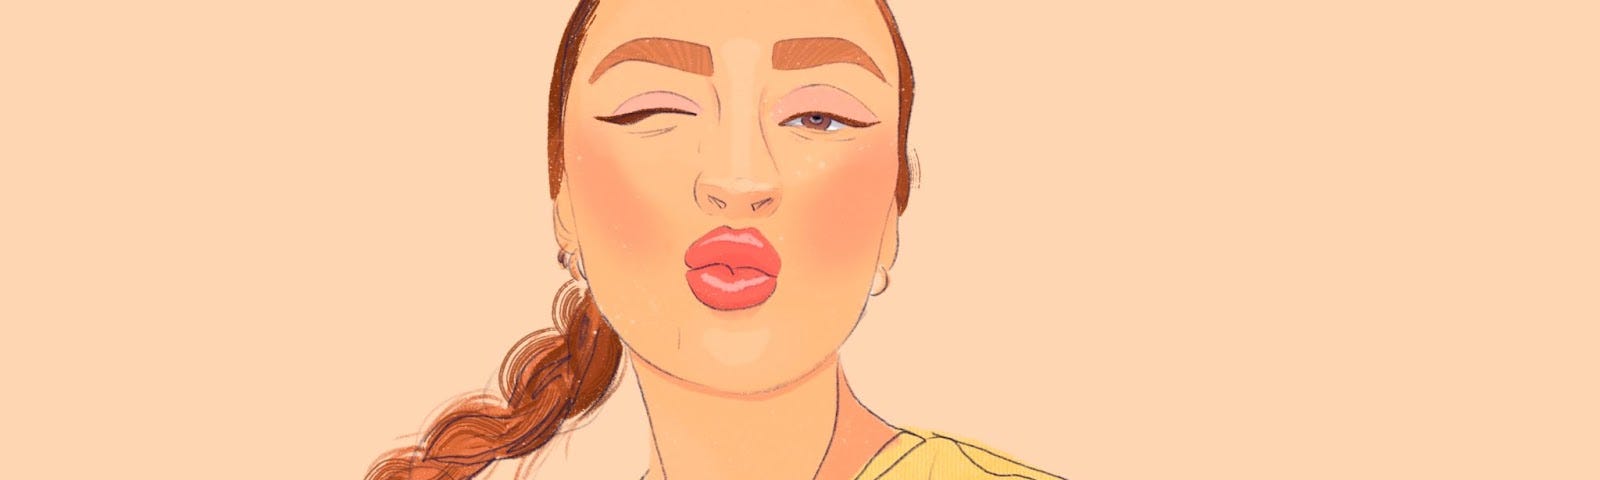 Digital illustration of a girl with a braid making a kissing face